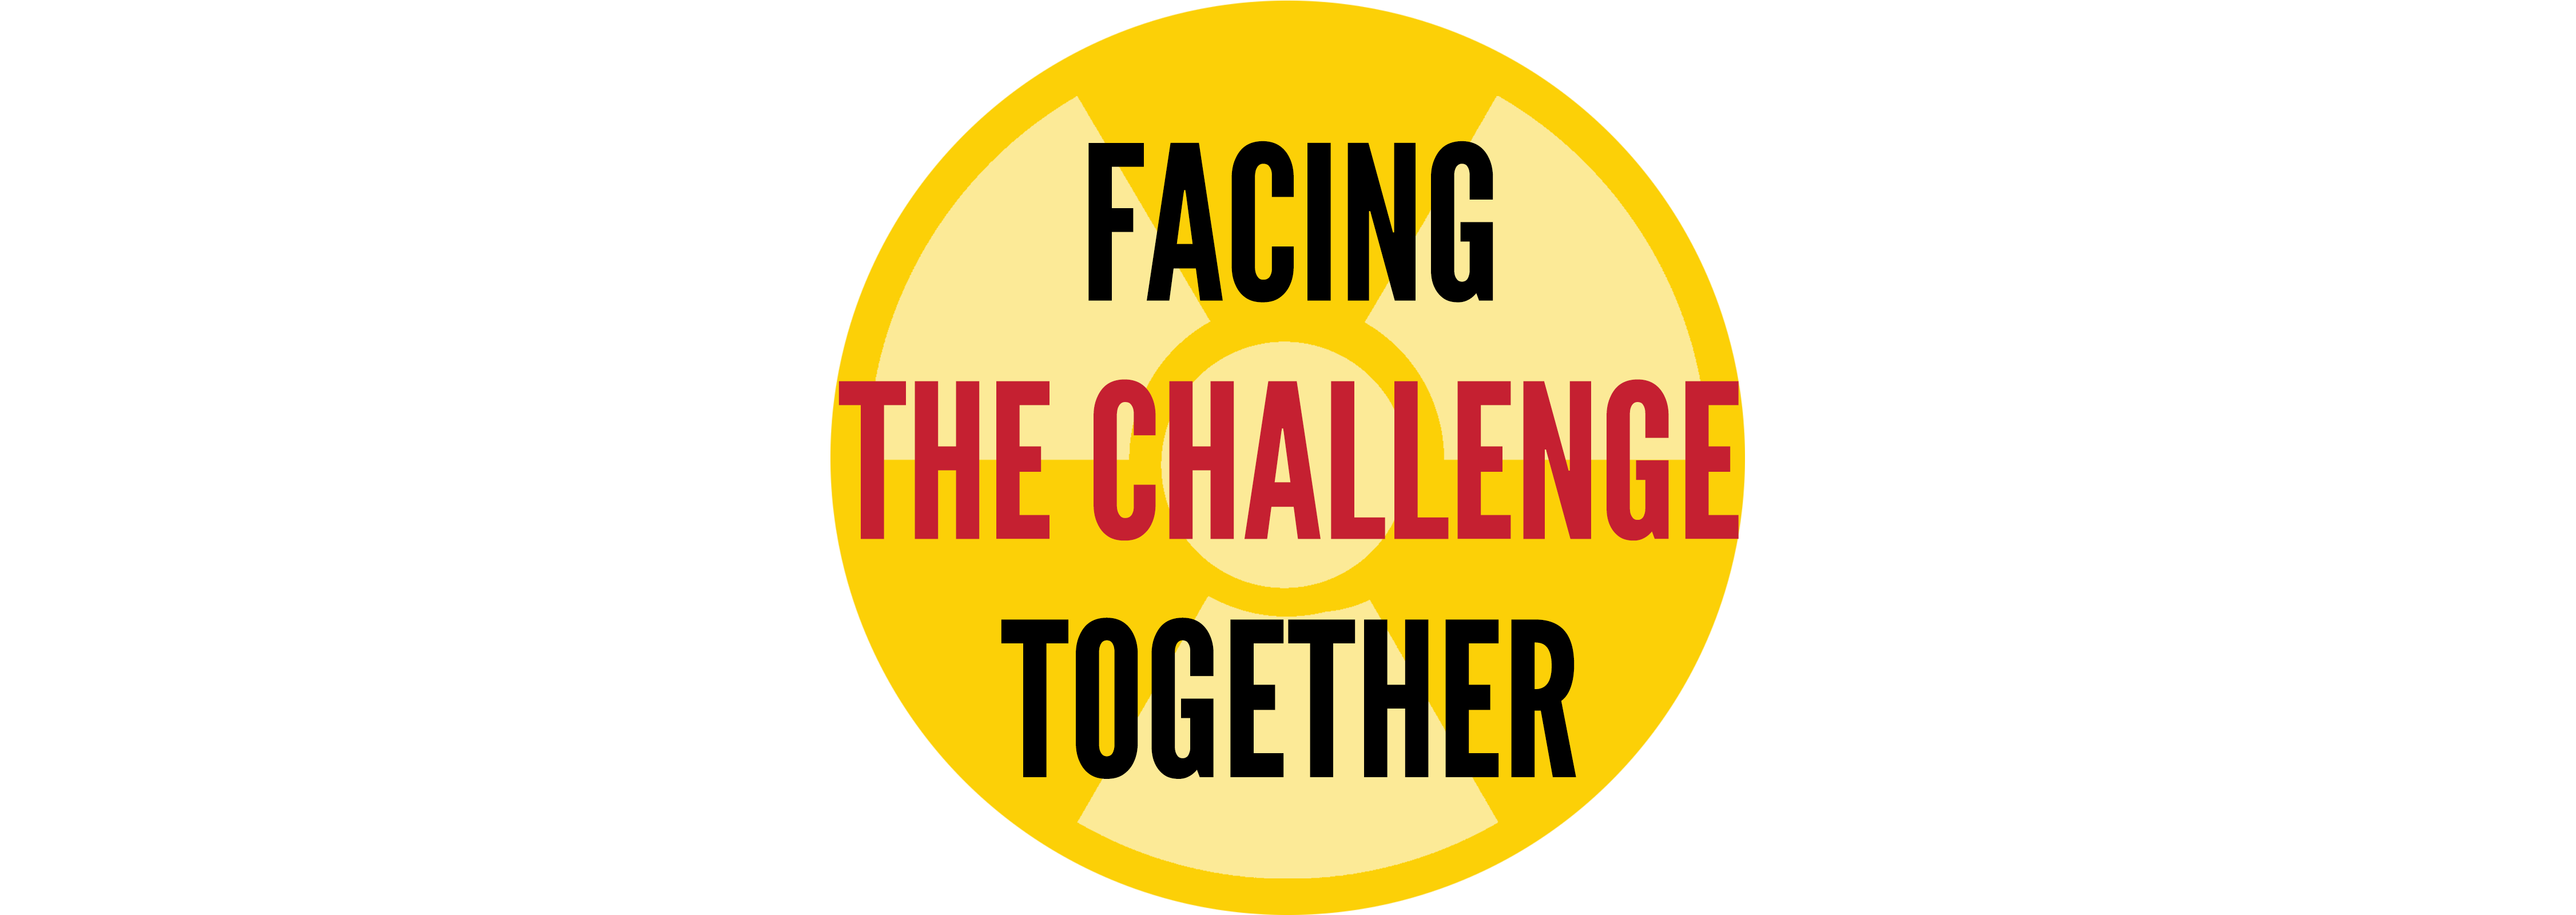 Facing the Challenge Together